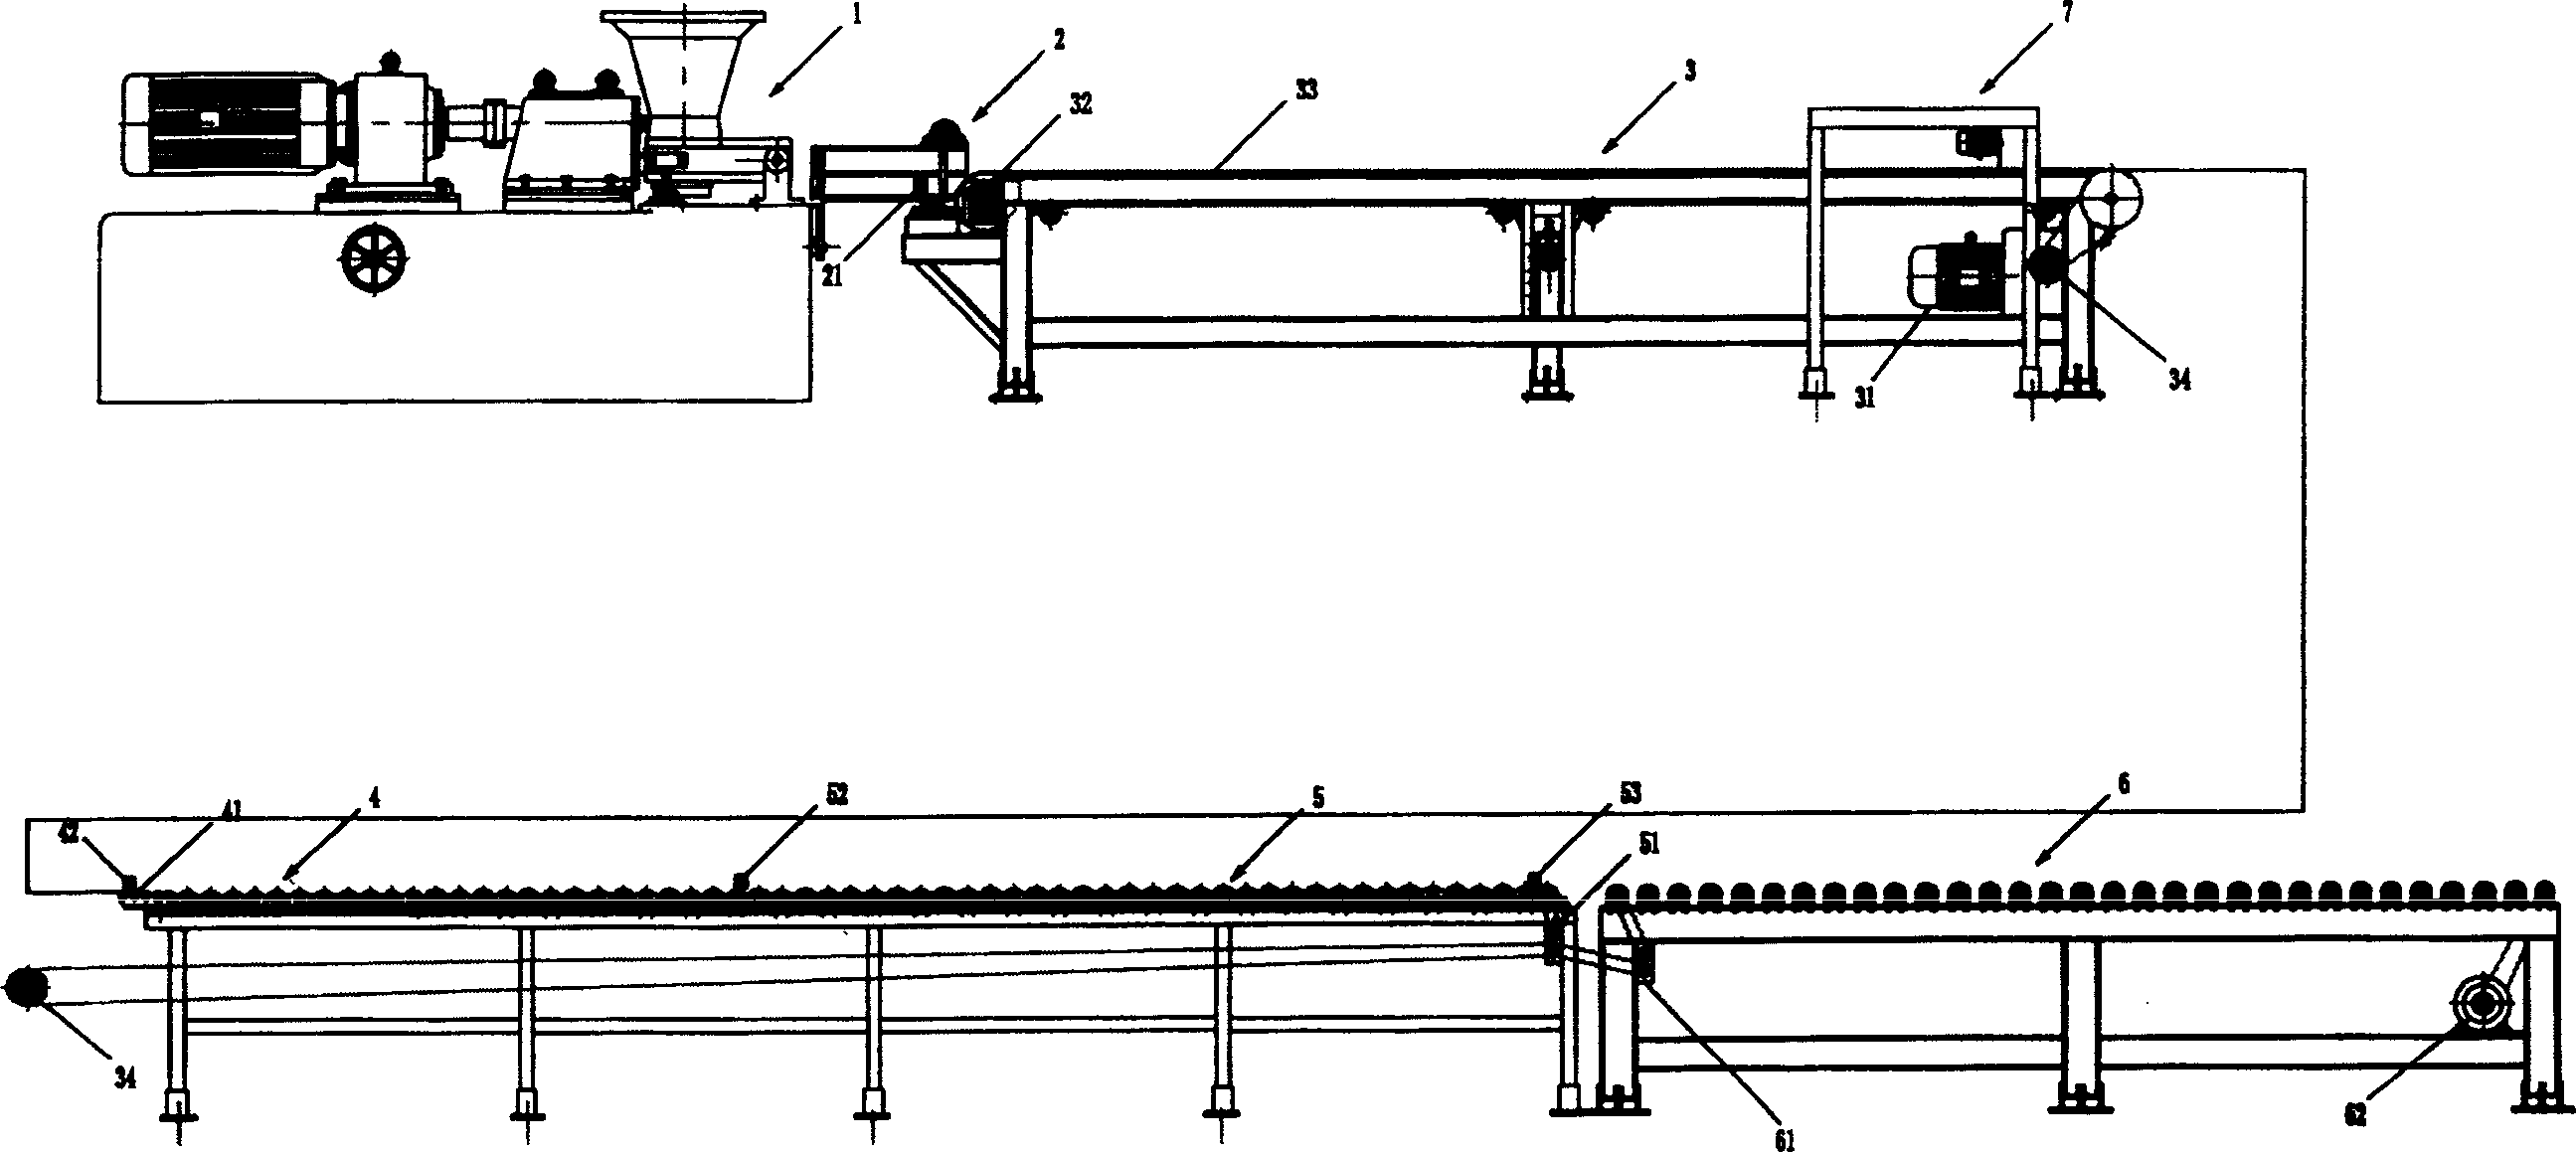 Automatic non-supporting board manufacture and system of light batten